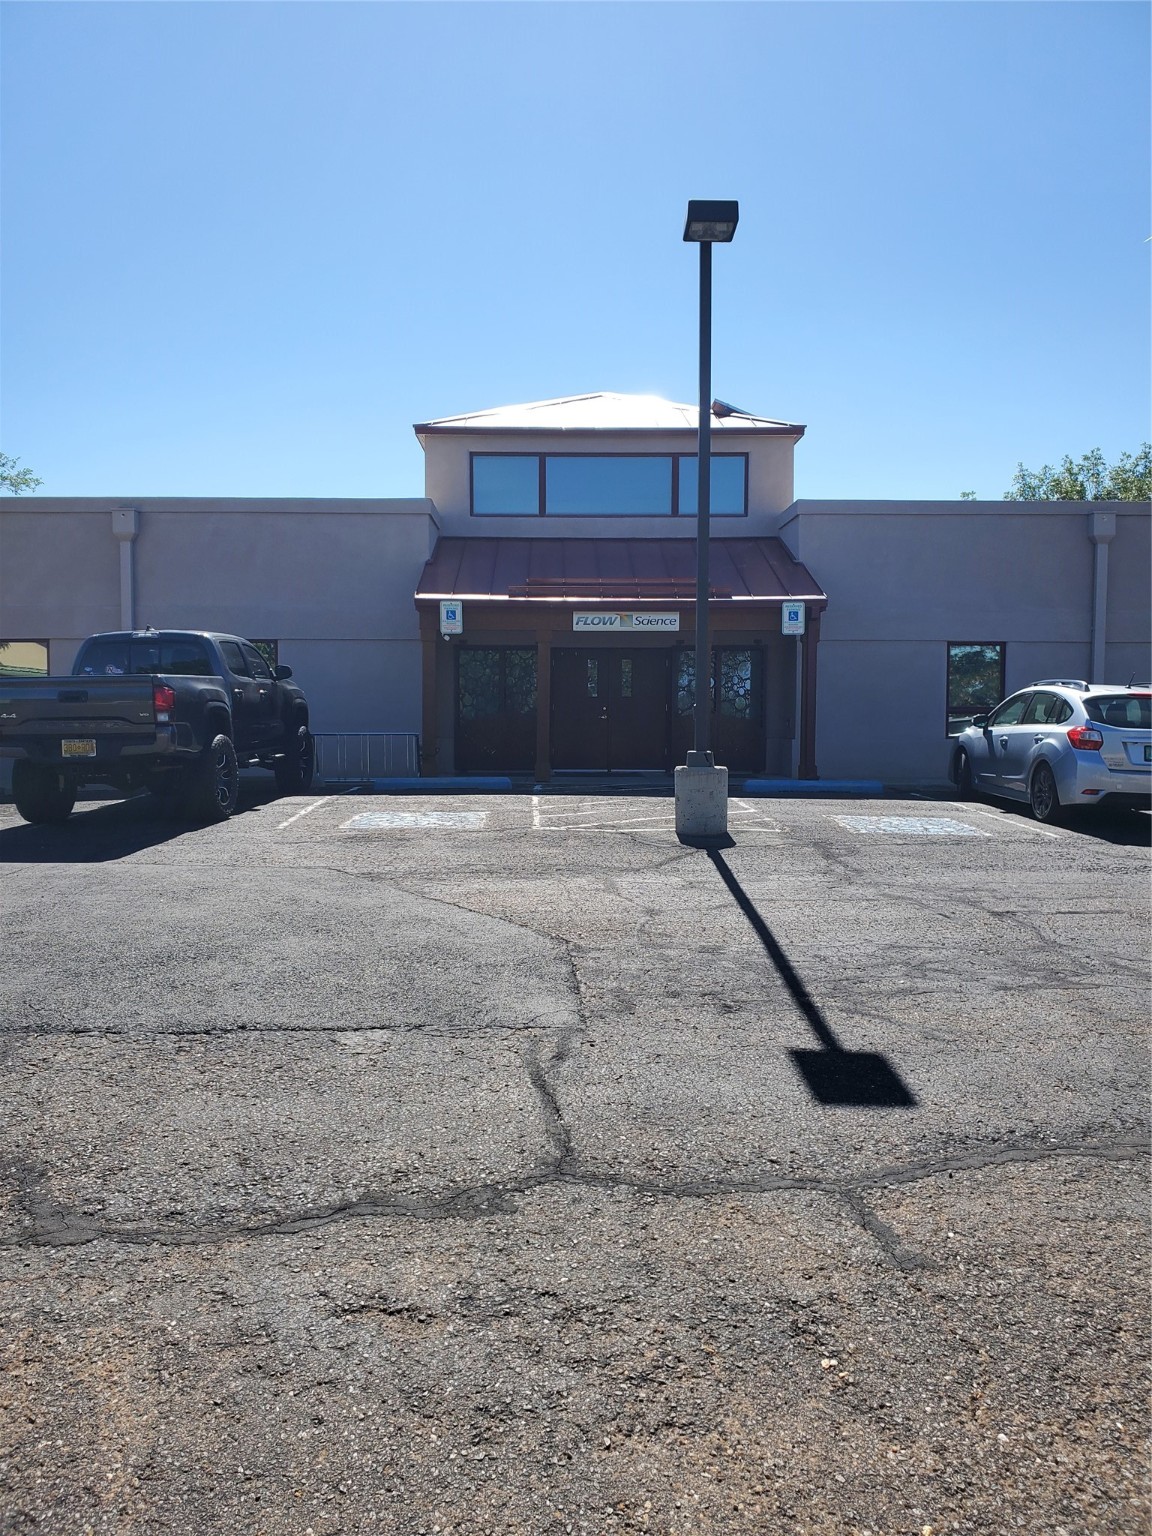 683 Harkle Rd, Santa Fe, New Mexico 87505, ,Commercial Lease,For Rent,683 Harkle Rd,202232523